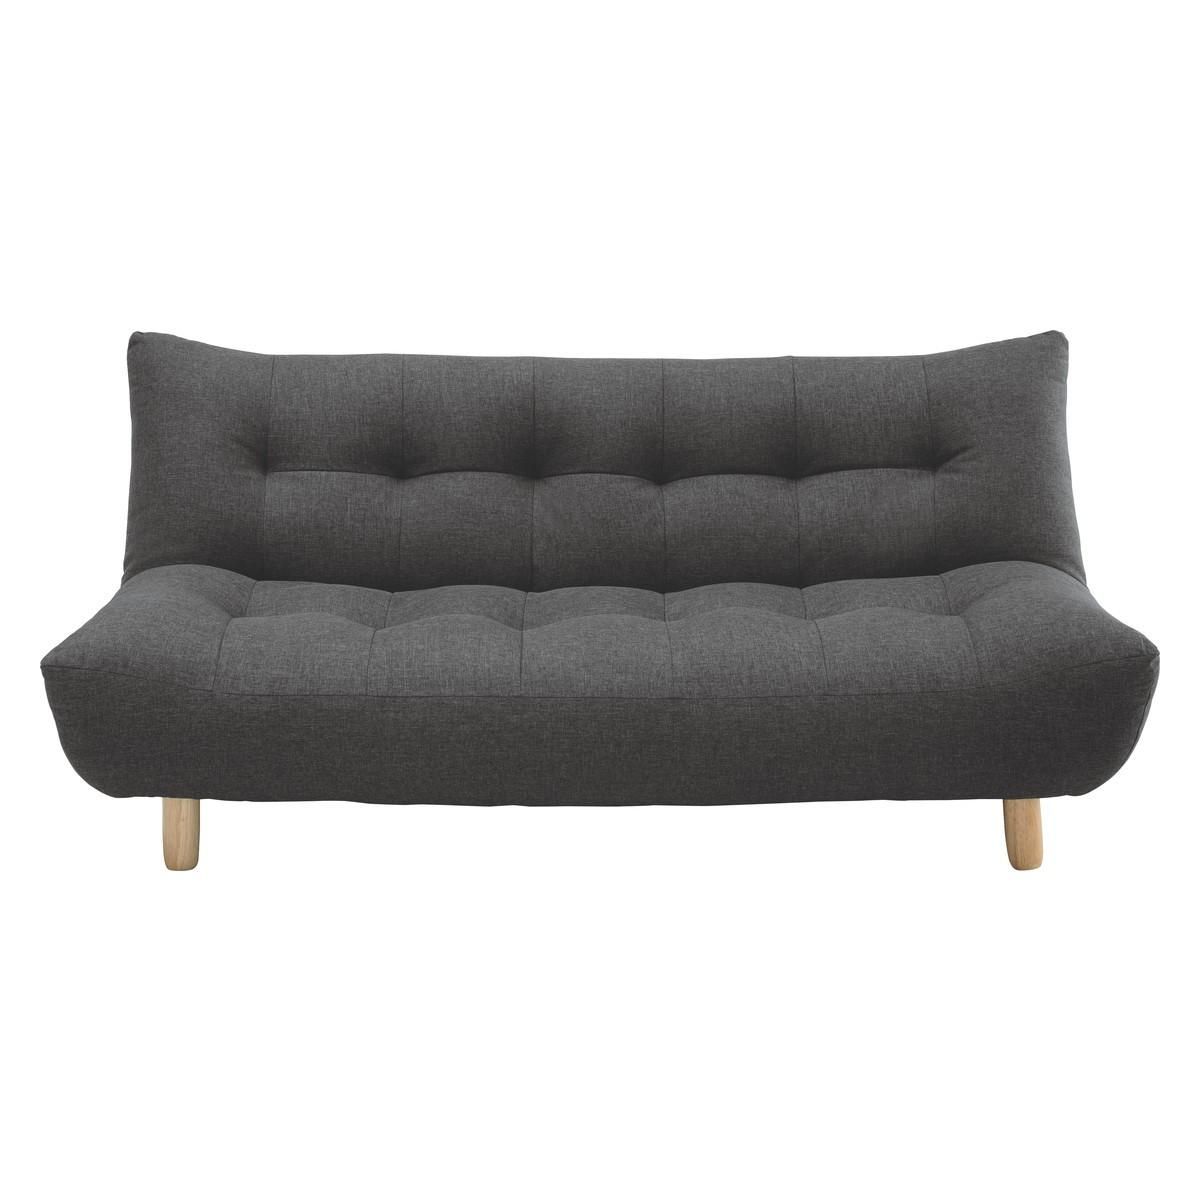 Kota Charcoal Fabric 2 Seater Sofa Bed | Buy Now At Habitat Uk Throughout 2 Seater Sofas (View 1 of 20)